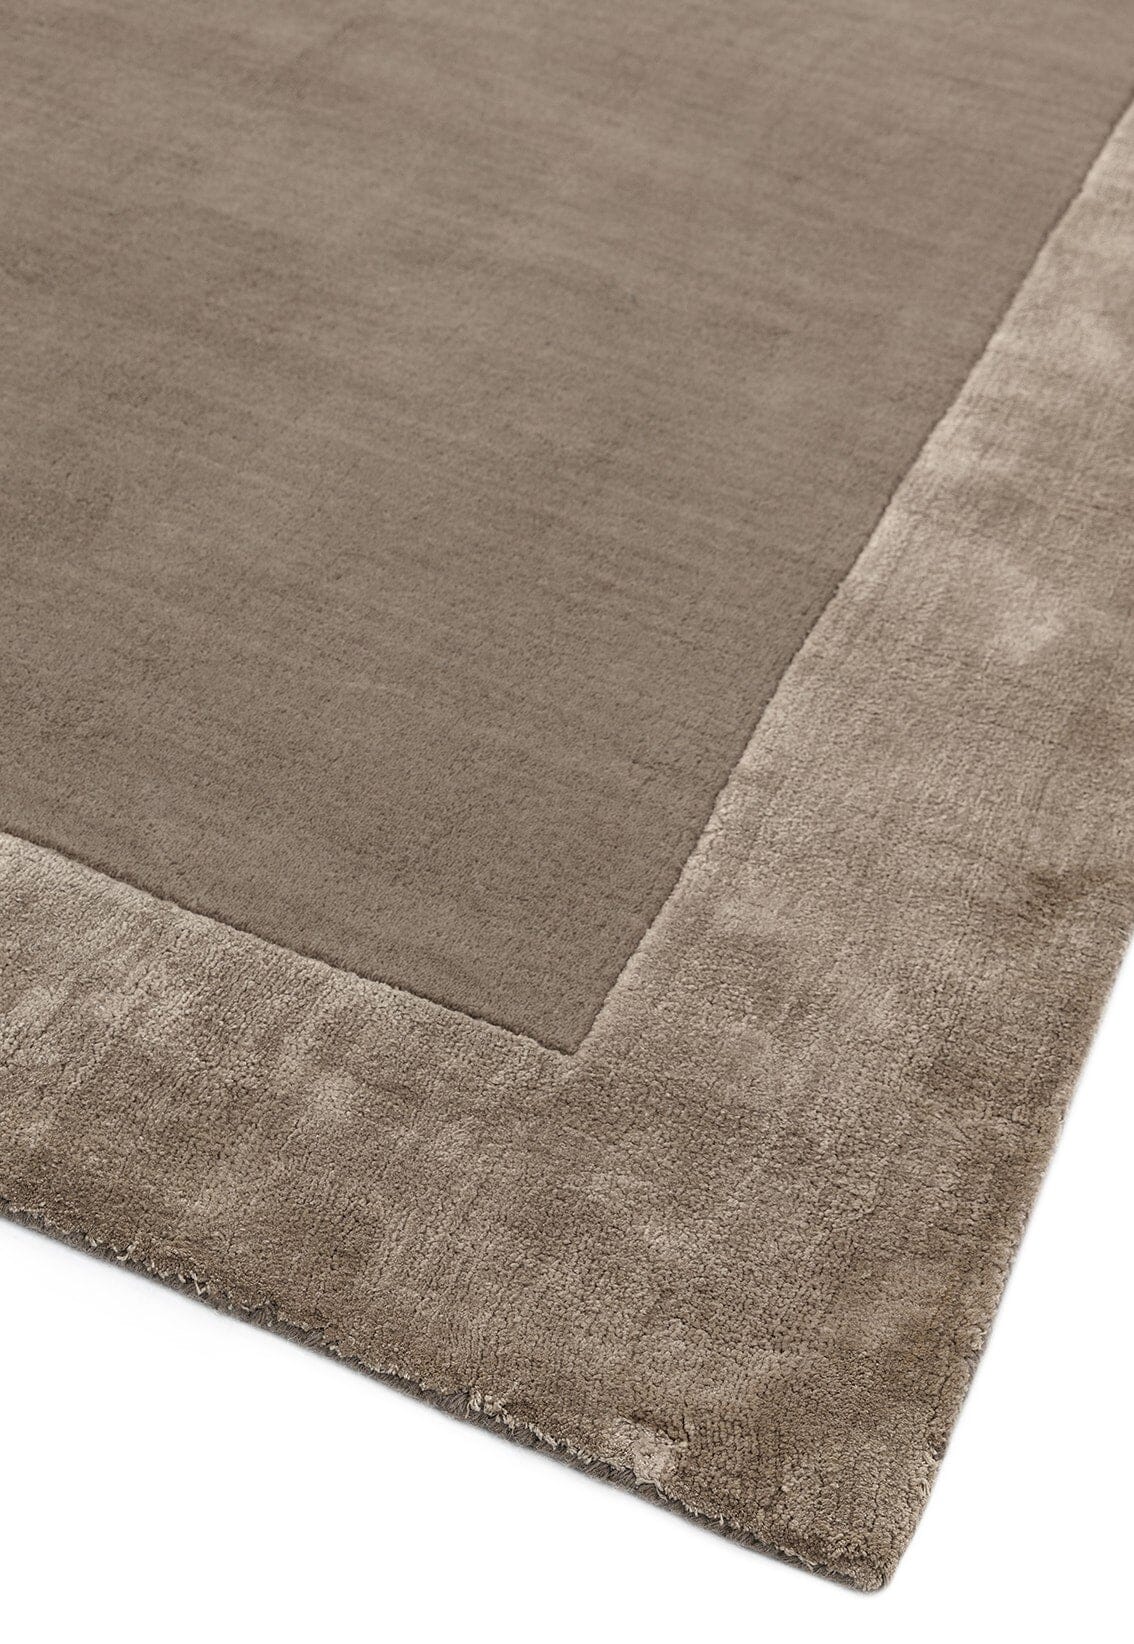  Asiatic Carpets-Asiatic Carpets Ascot Hand Woven Rug Taupe - 160 x 230cm-Beige, Natural 453 